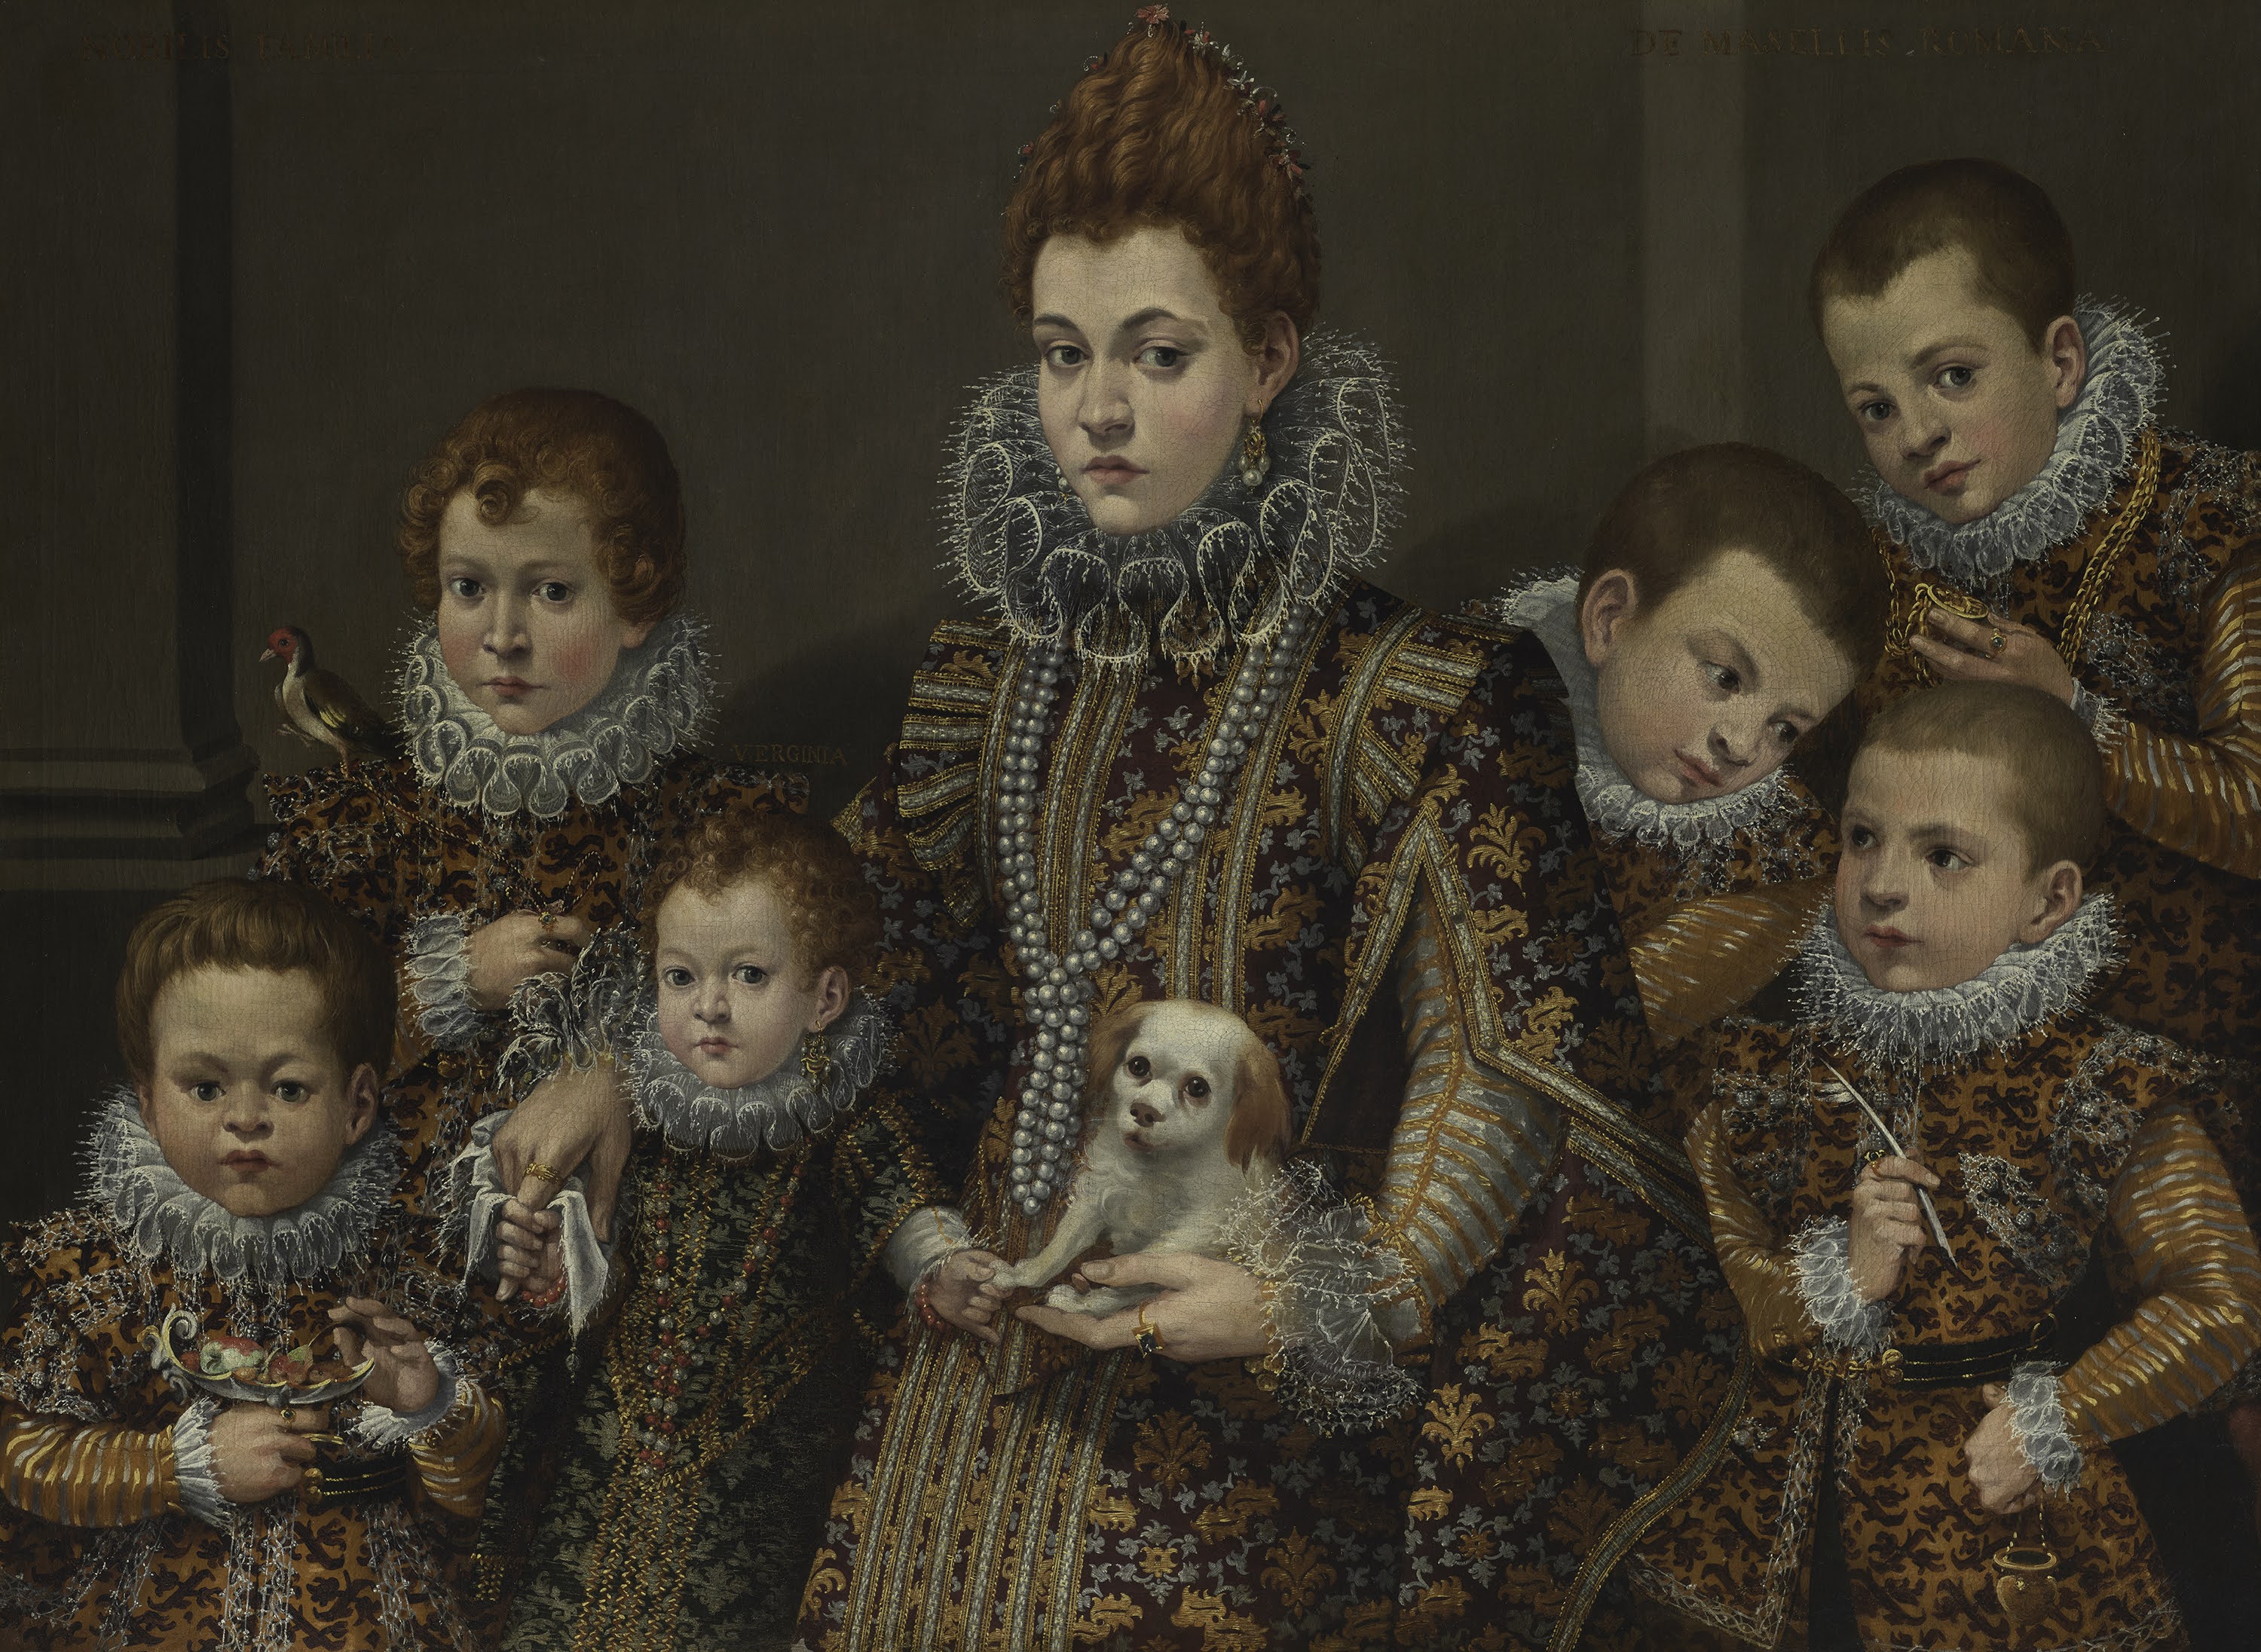 An ornate painting of six children and a dog, all in elaborate Elizabethan attire with ruffed collars.